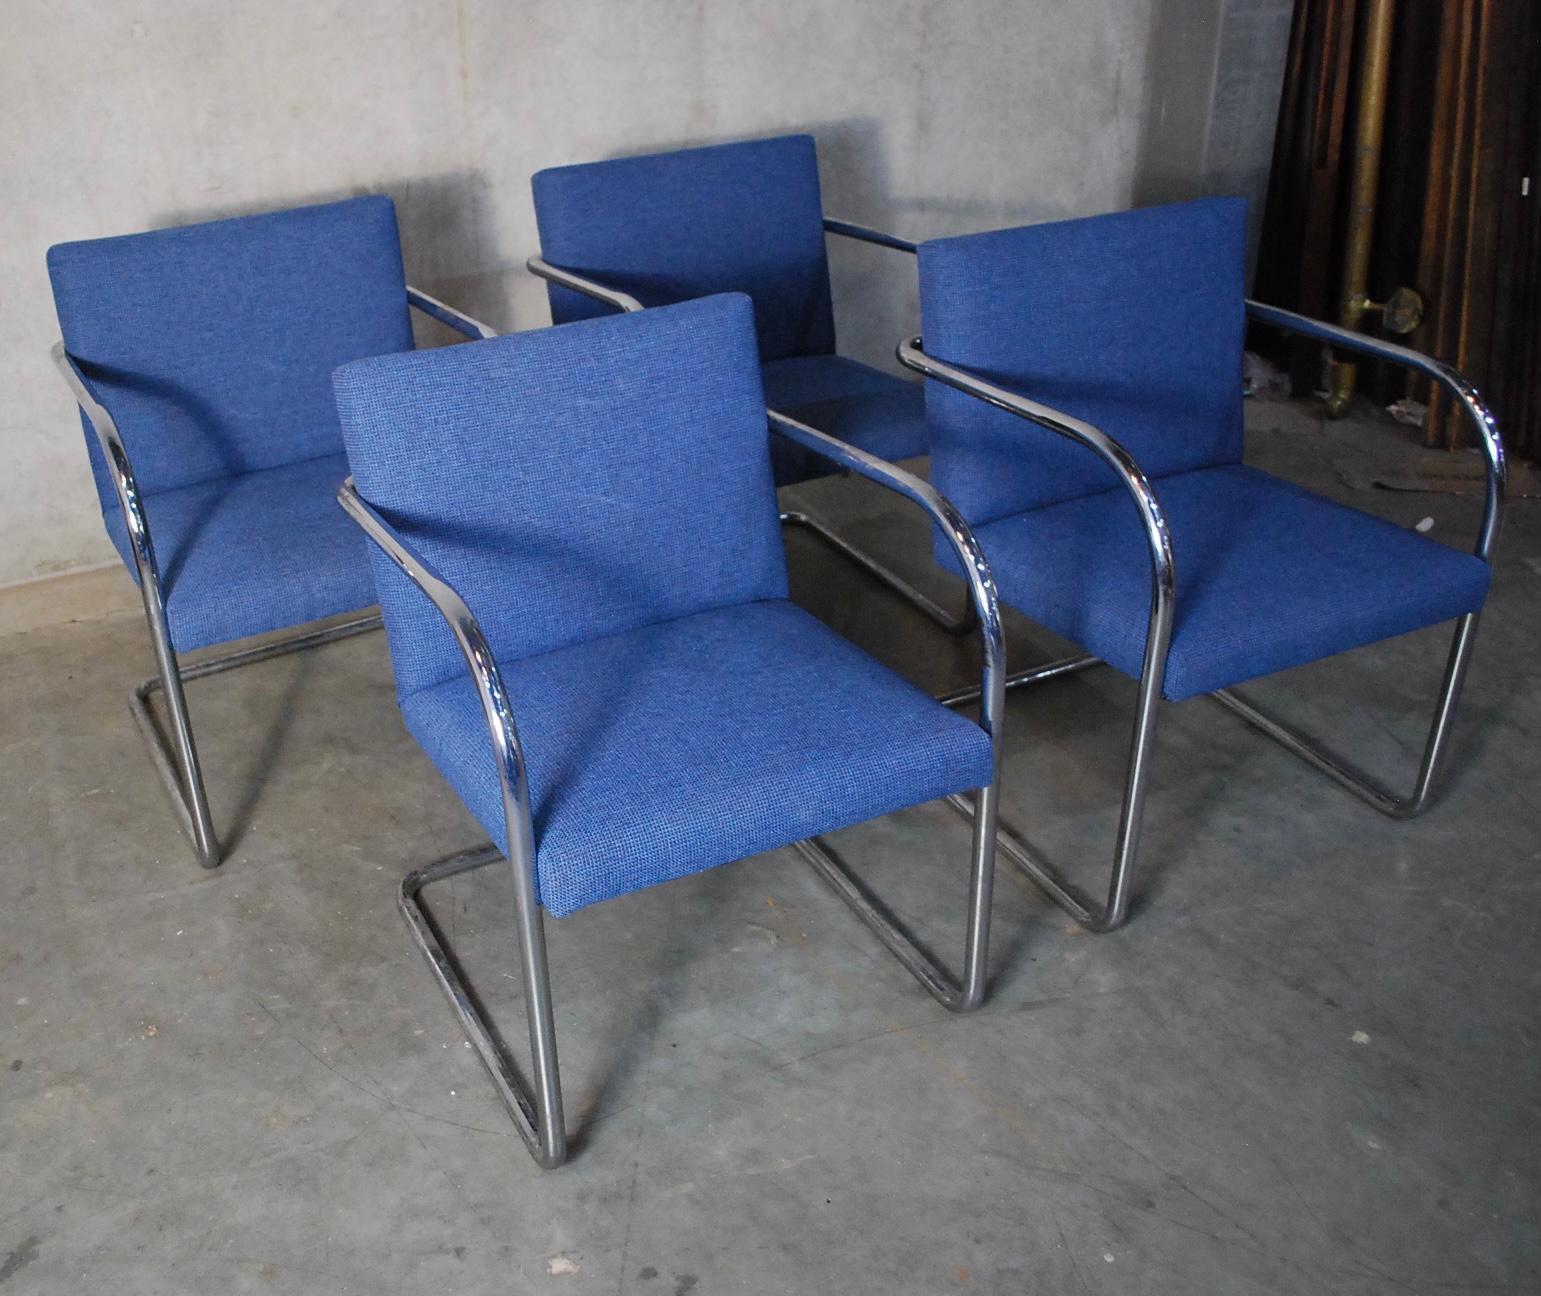 Classic Bauhaus design pair of Brno chairs by Mies Van der Rohe for Thonet.
The chairs feature polished chrome-plated tubular steel cantilevered frames, seats upholstered in a dark blue weave.
Original labels.
Salvaged in Seattle.